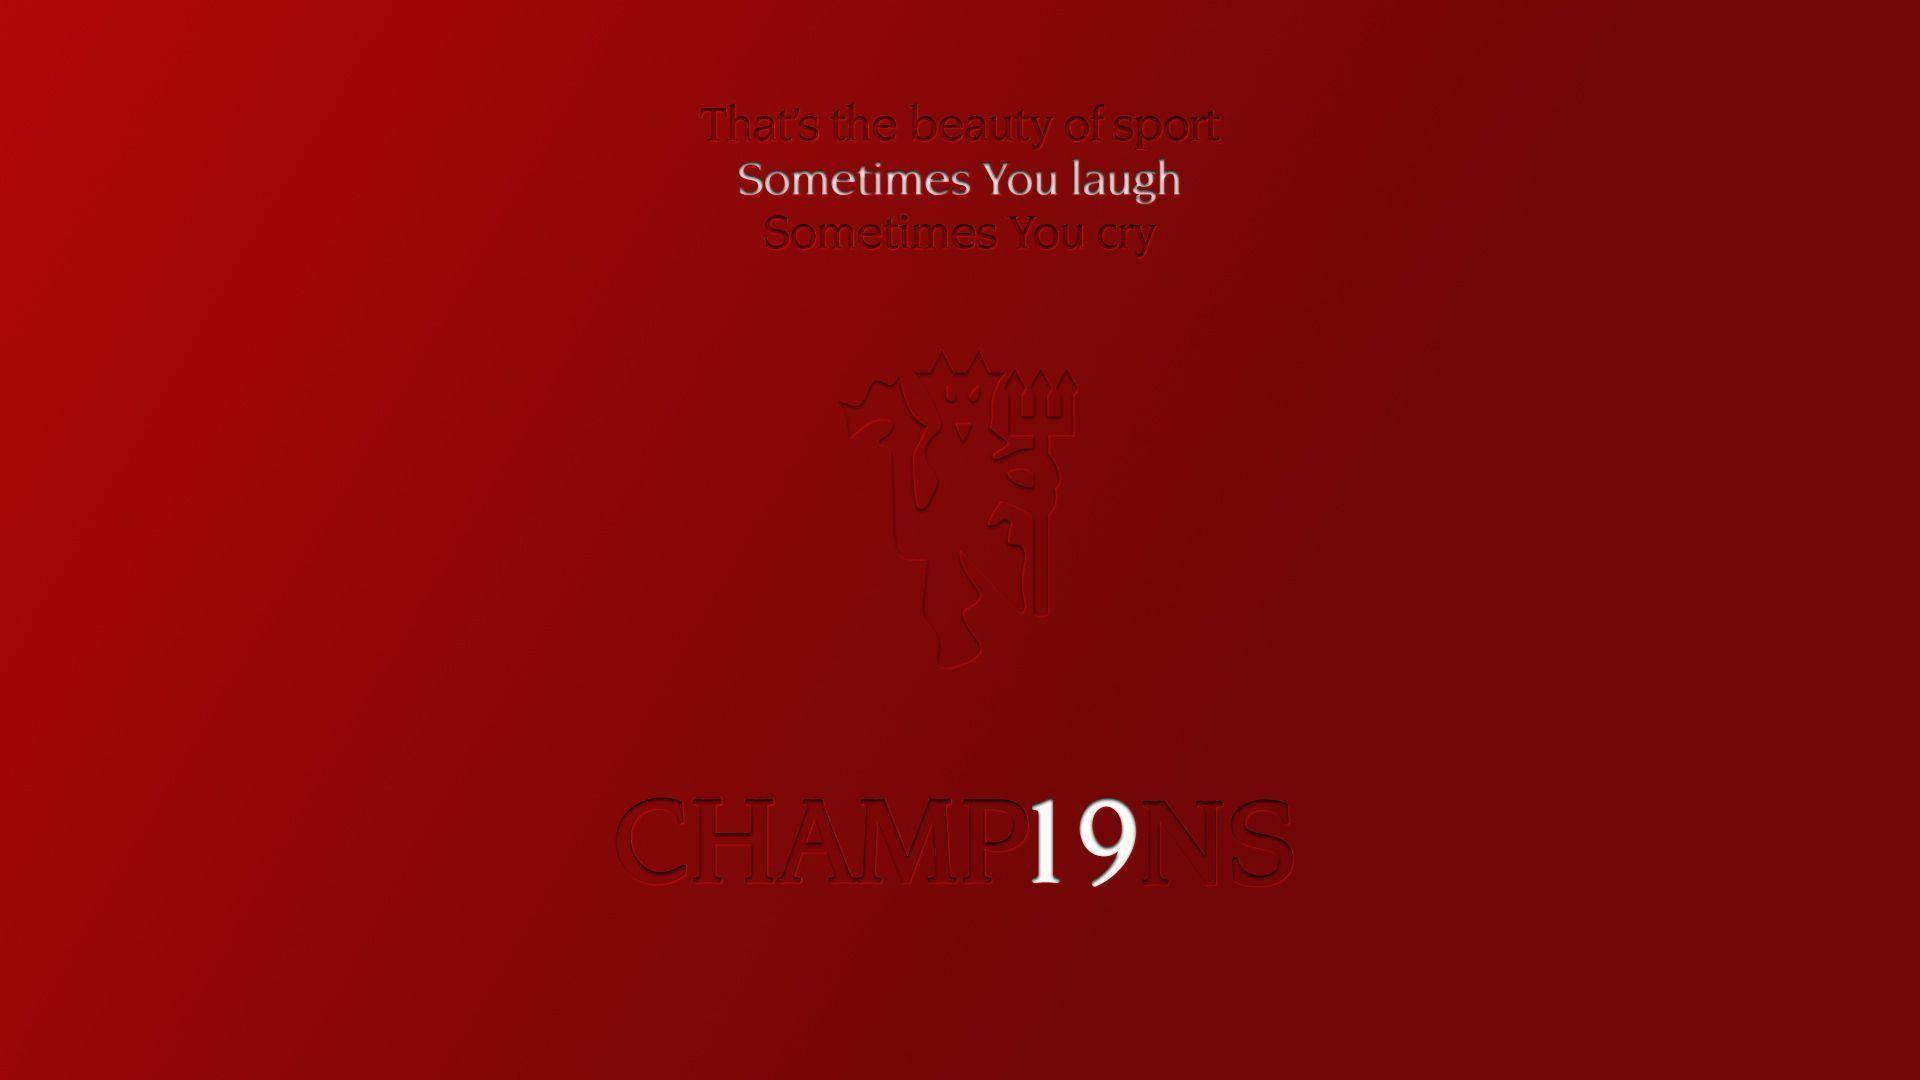 Manchester United FC Quotes. High Definition Wallpaper, High